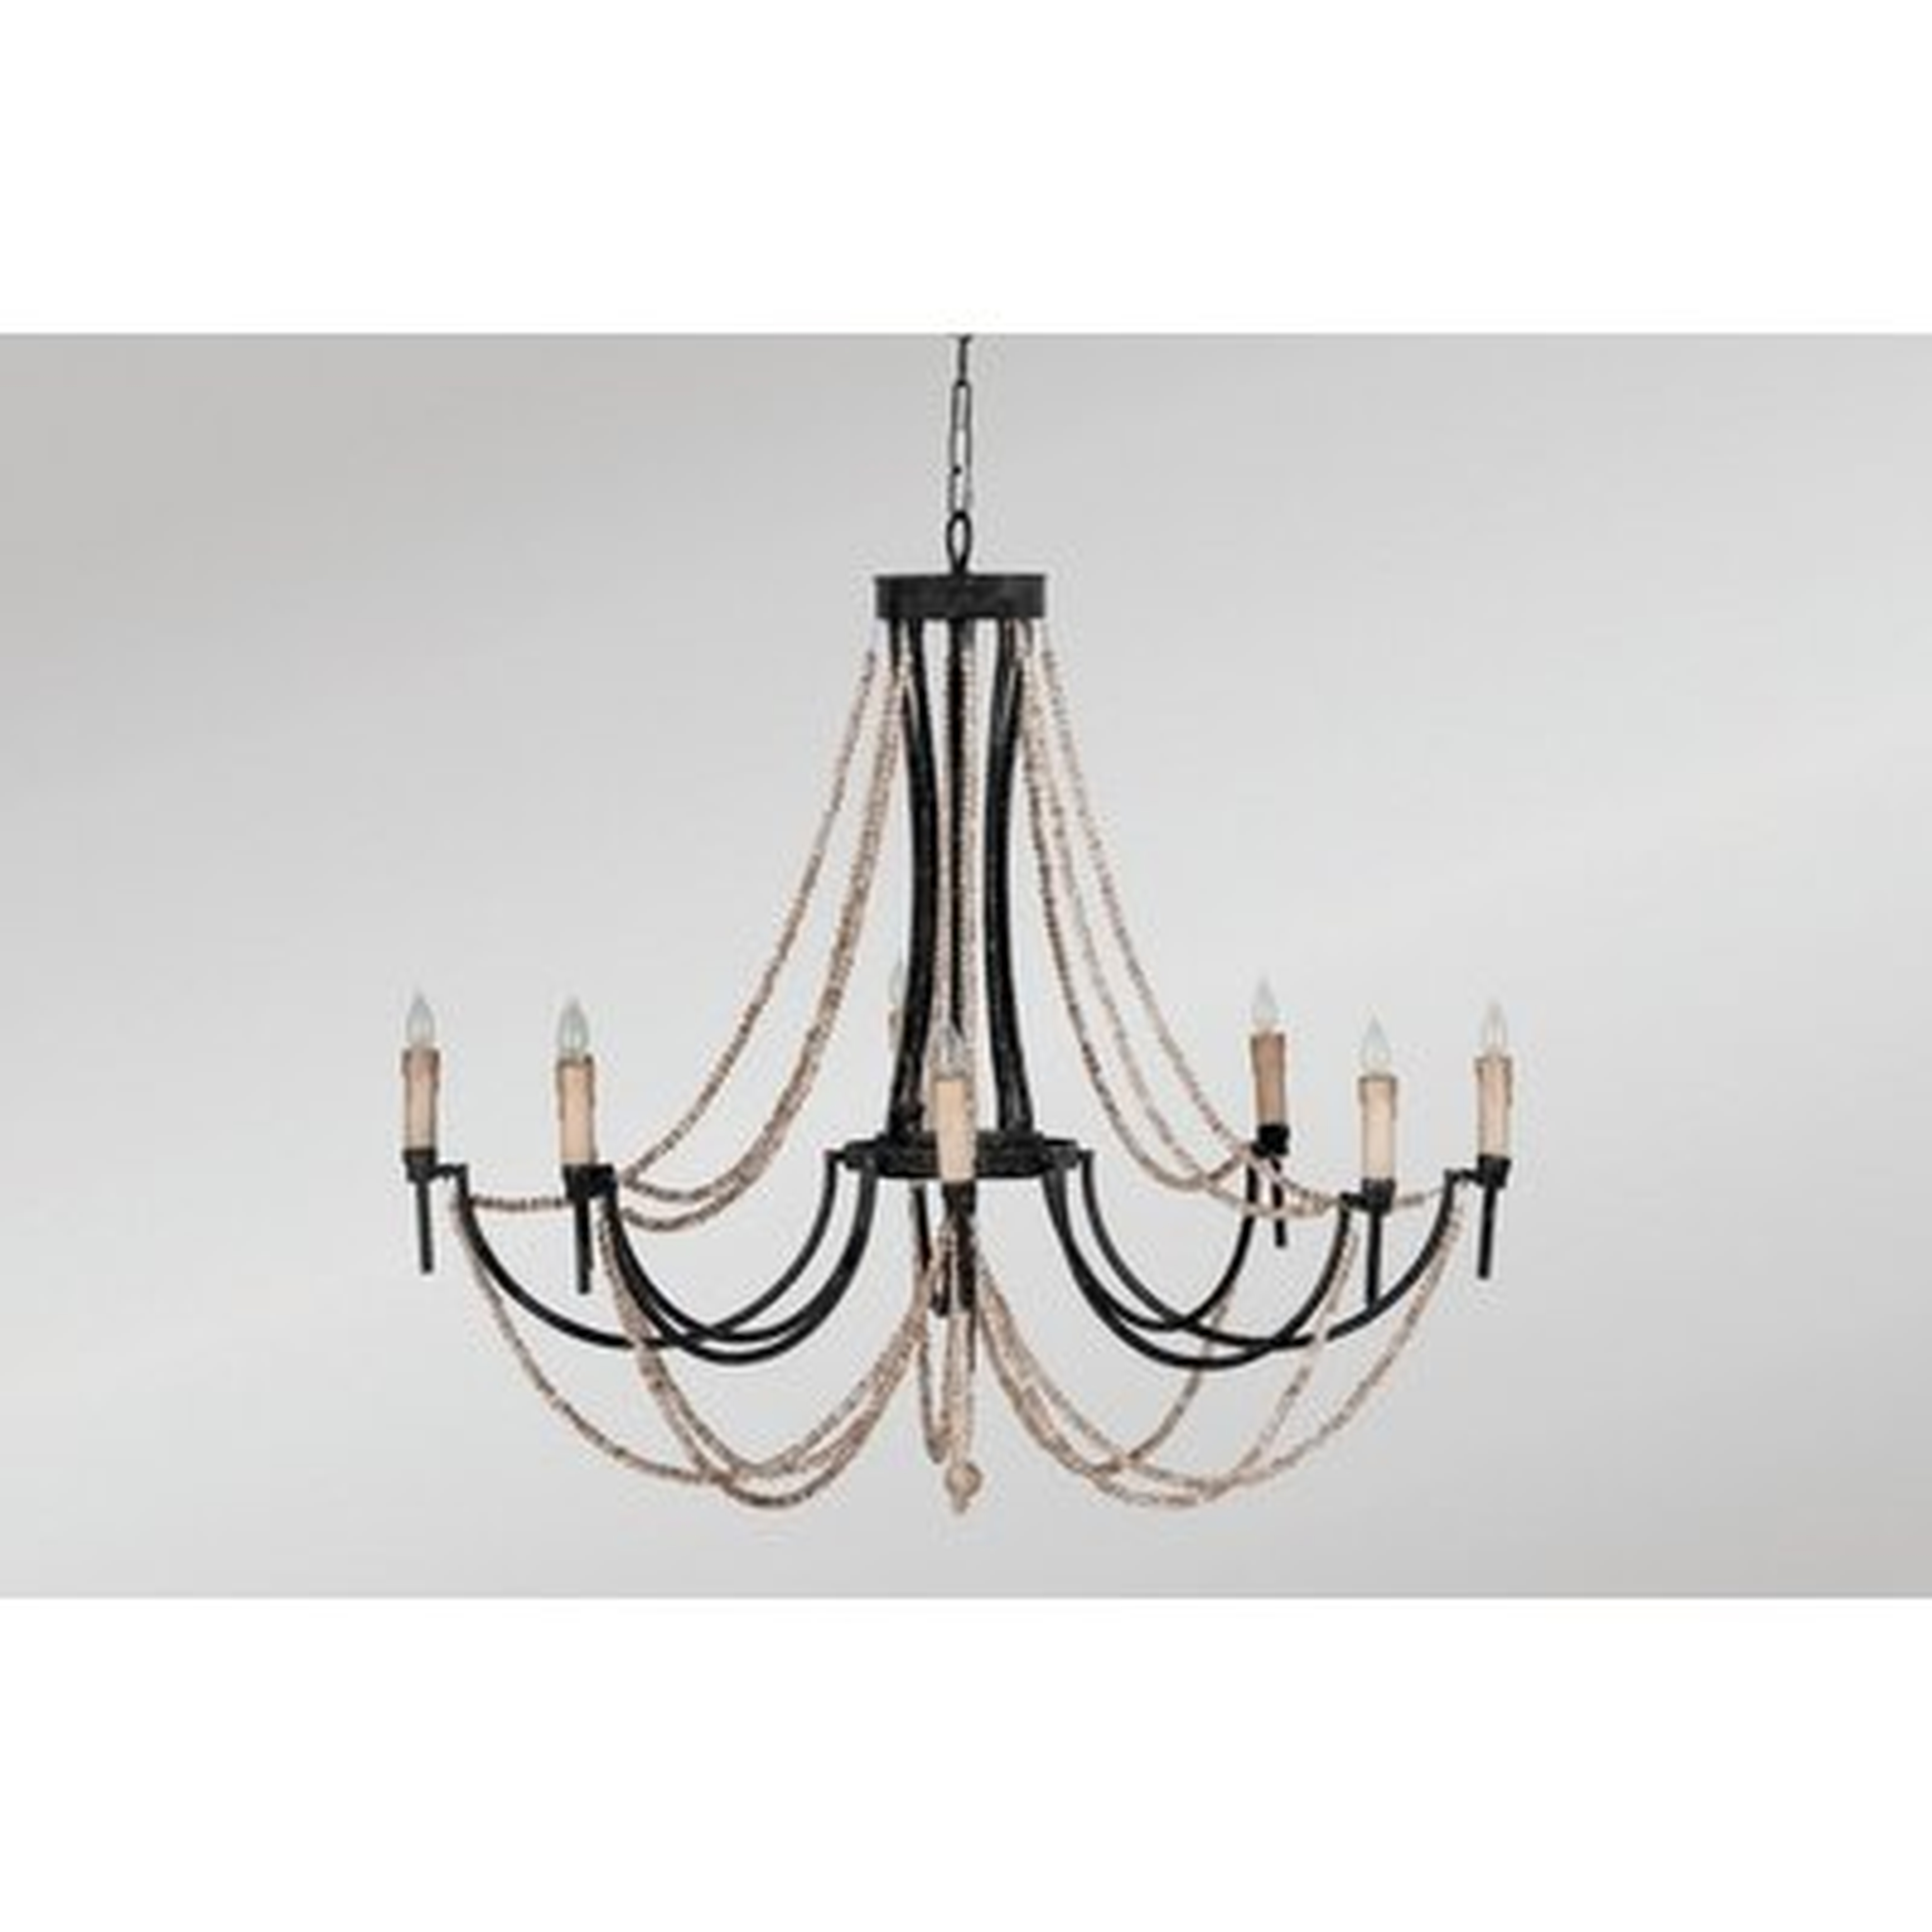 Percy 8-Light Candle-Style Chandelier - Wayfair